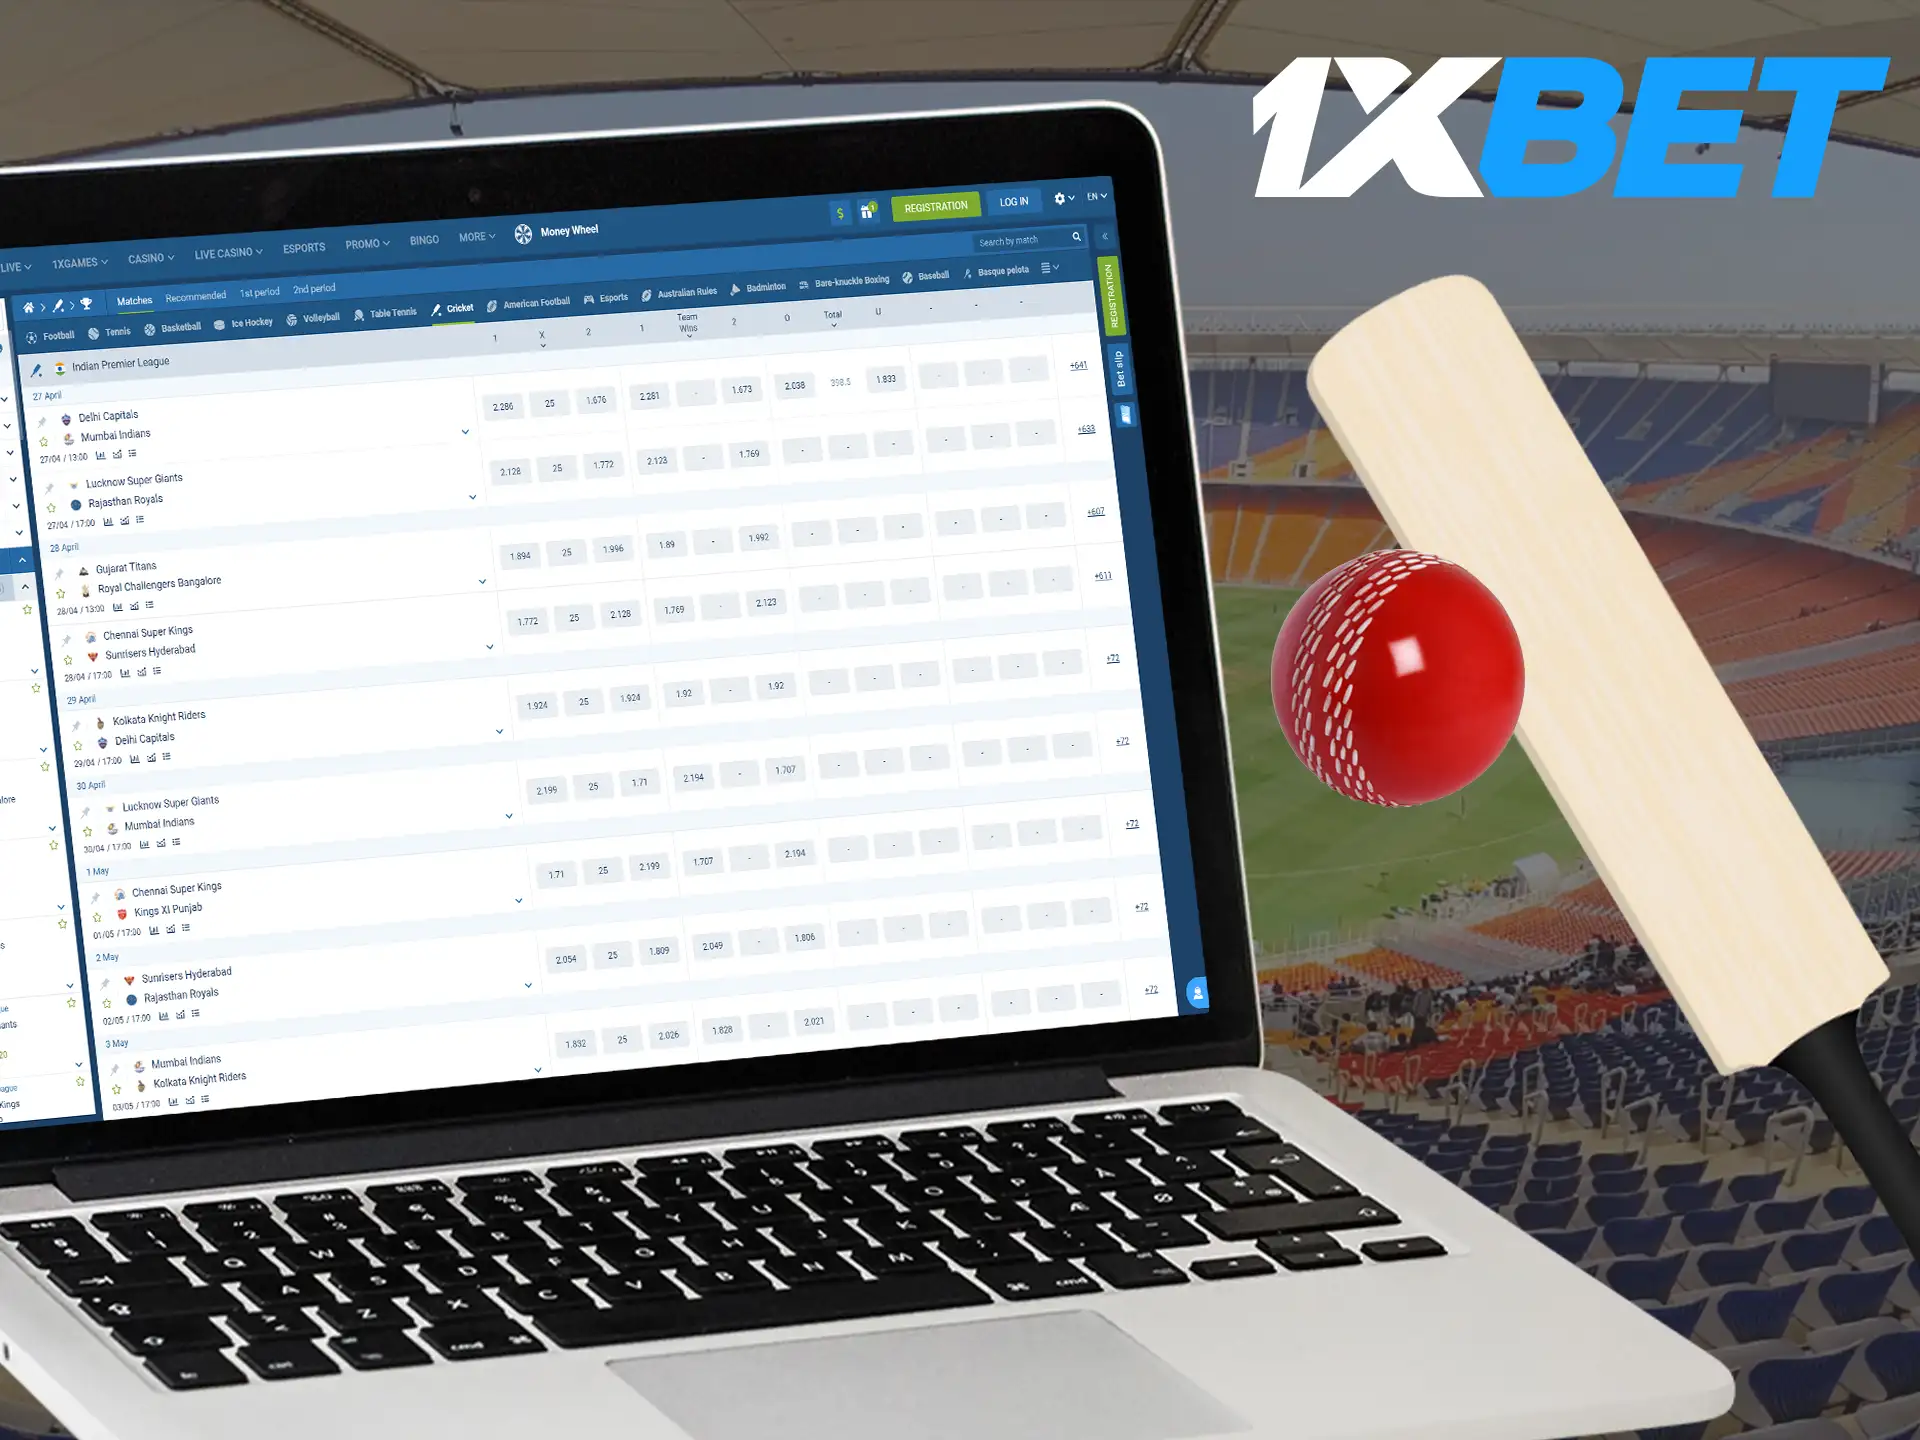 A wide range of cricket matches are offered by 1xBet sport bookmaker on which users can bet online.